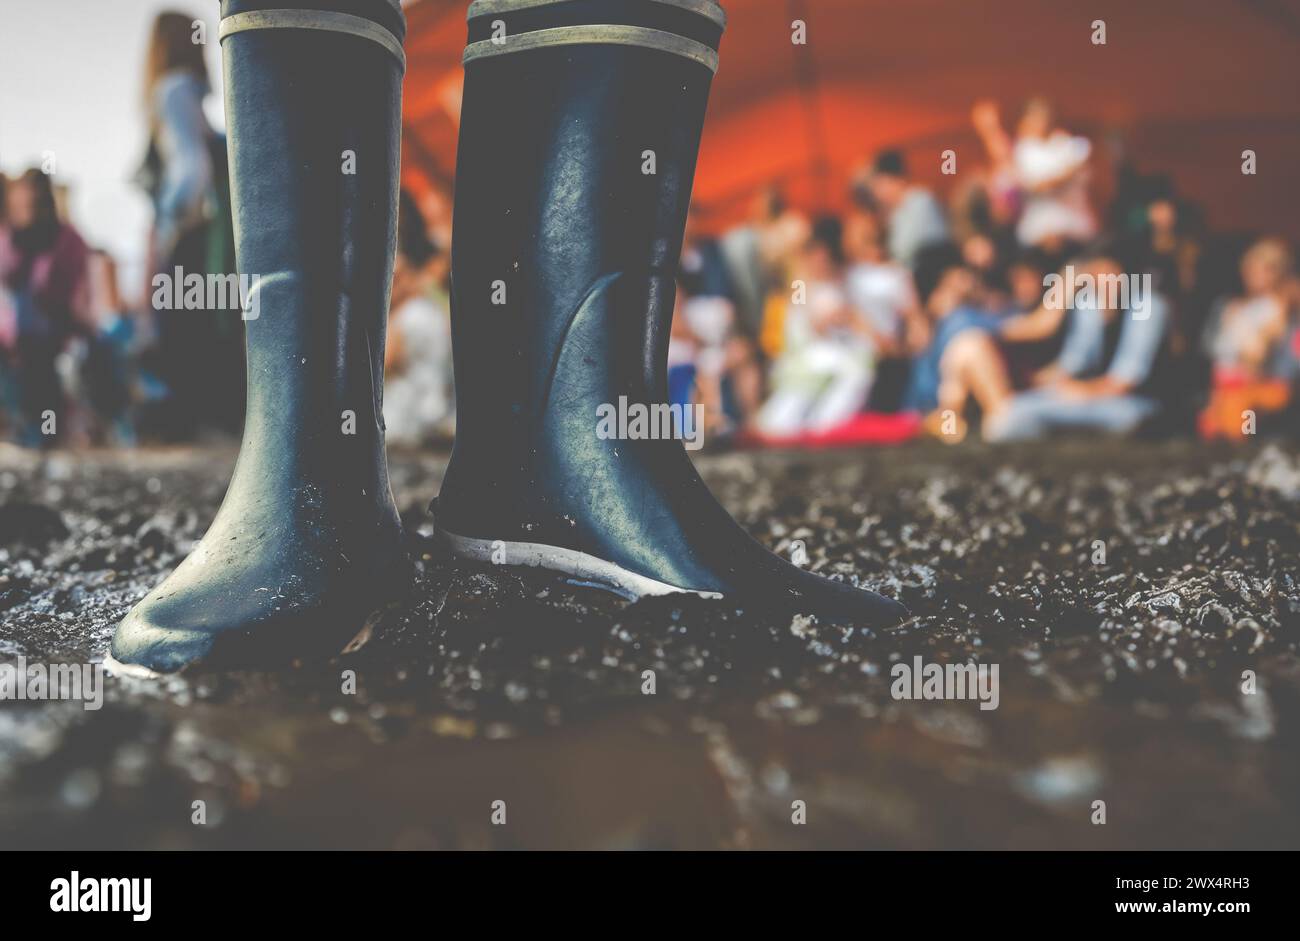 Rubber Boots In The Mud At A Music Festival, With Copy Space Stock Photo